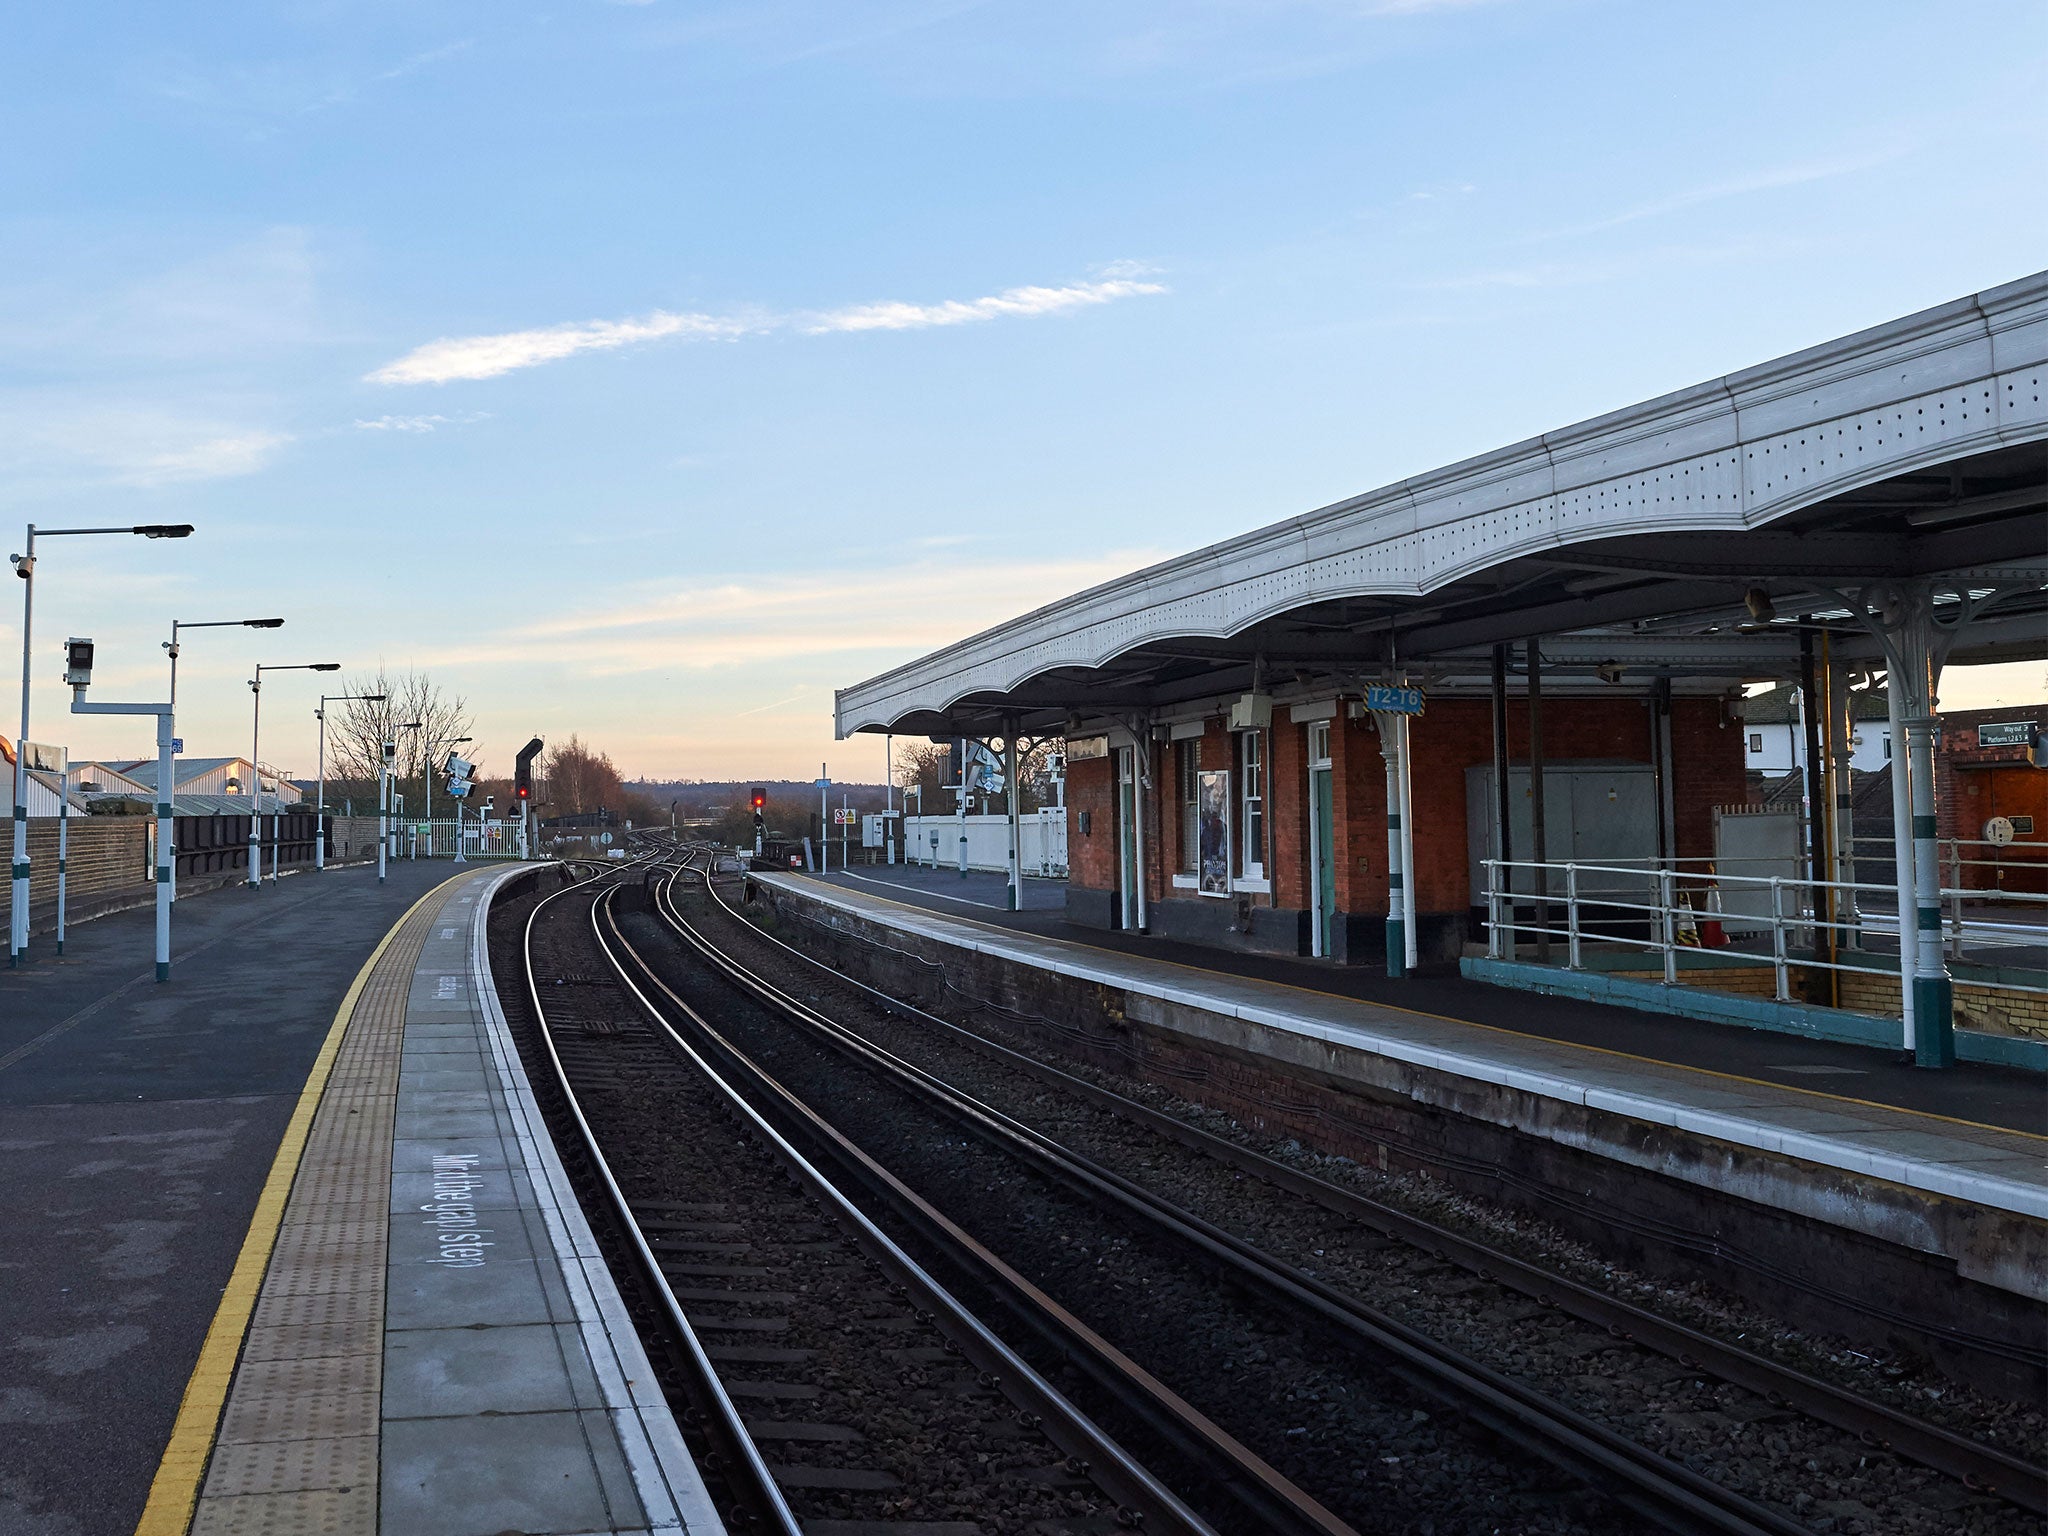 Small adjustments to train stations could save lives, Network Rail says